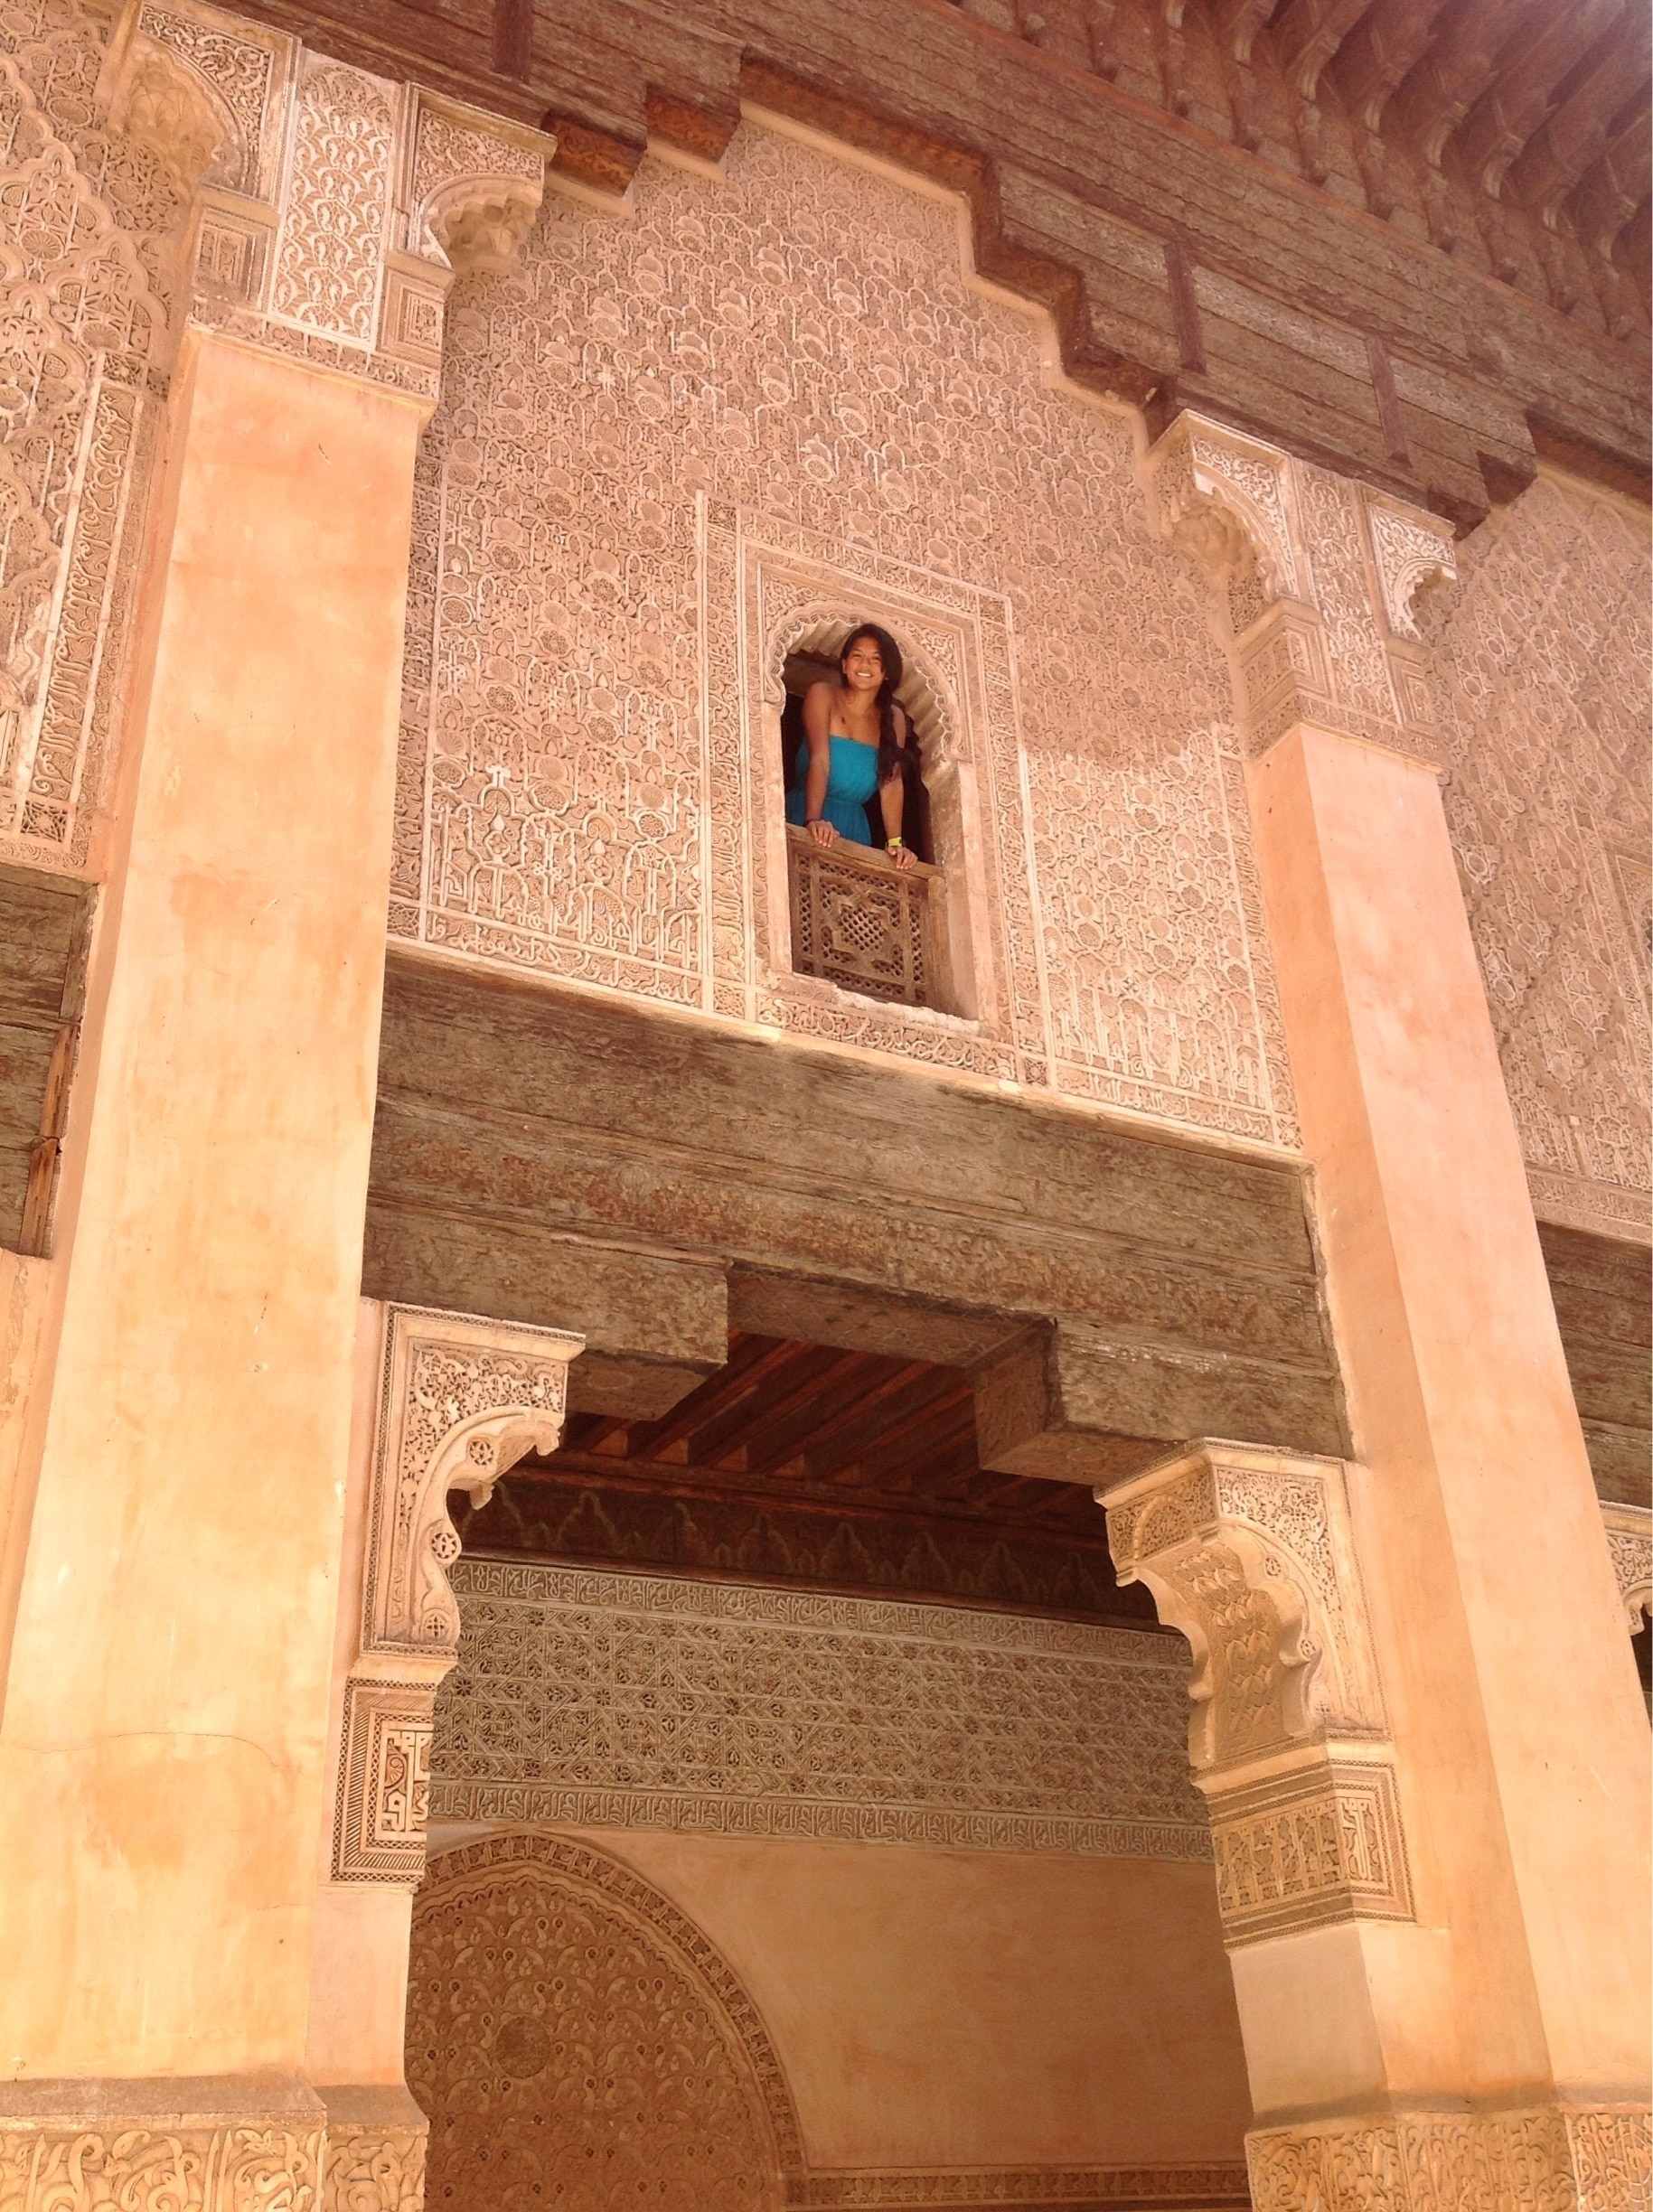 Picture yourself looking at one of these tiny windows over looking the main courtyard as a student at Ben Youssef Madrasa. Looking at all the geometric shapes and carvings of the #architecture will make you want to study art!

